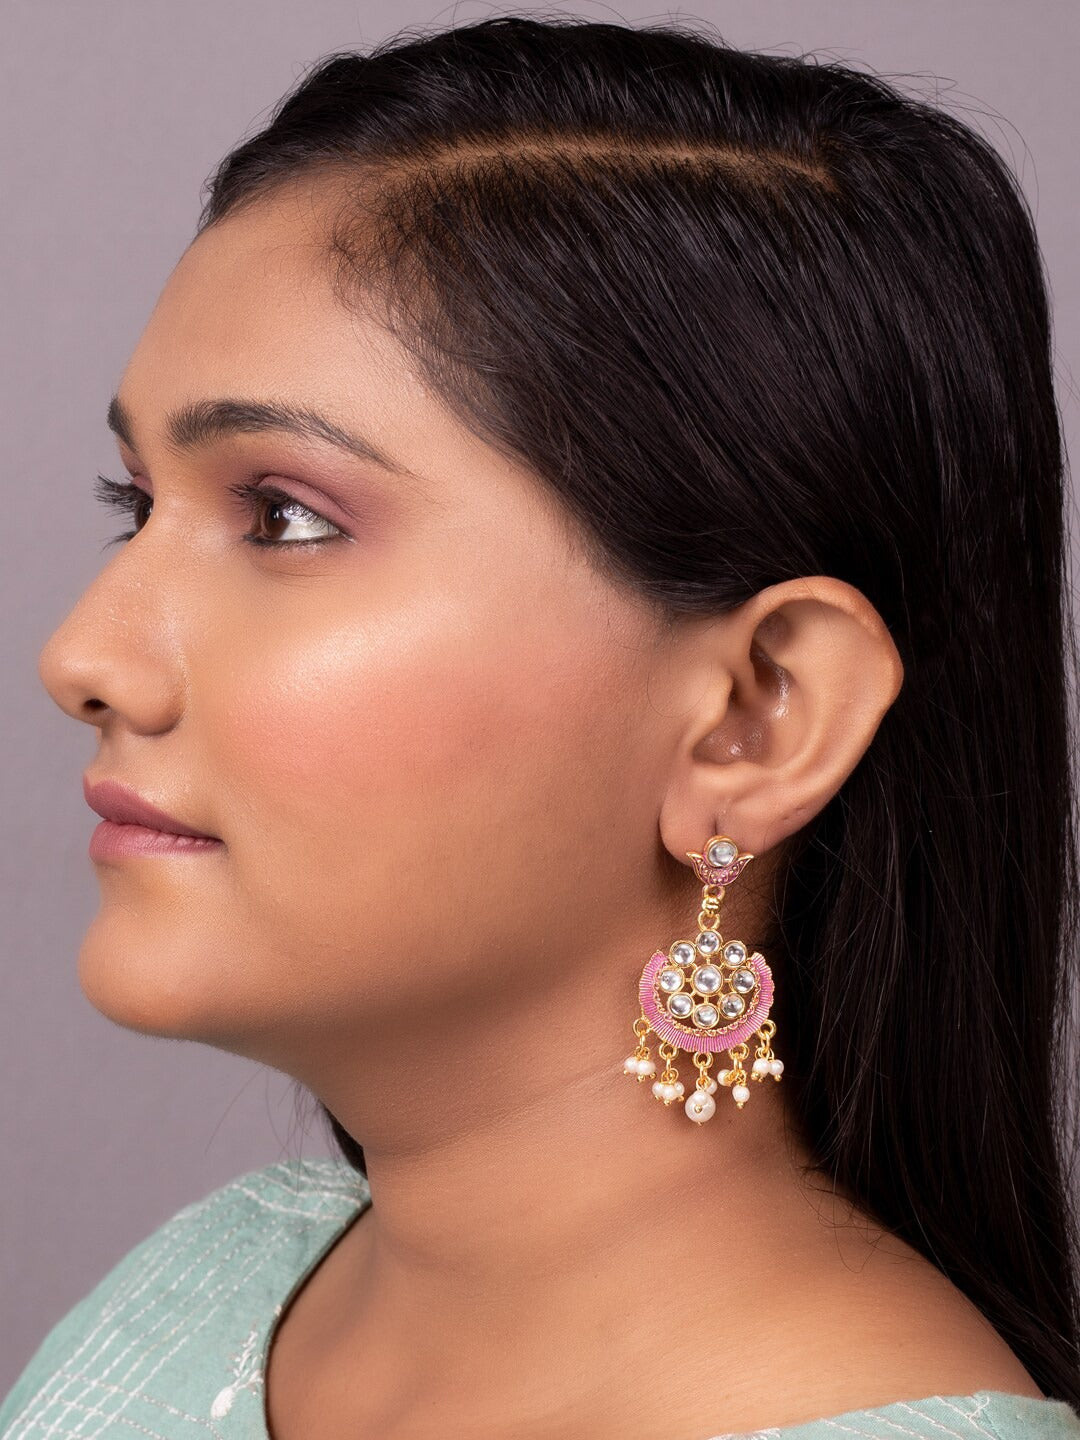 Women's Gold-Plated & Pink Contemporary Drop Earrings - Morkanth